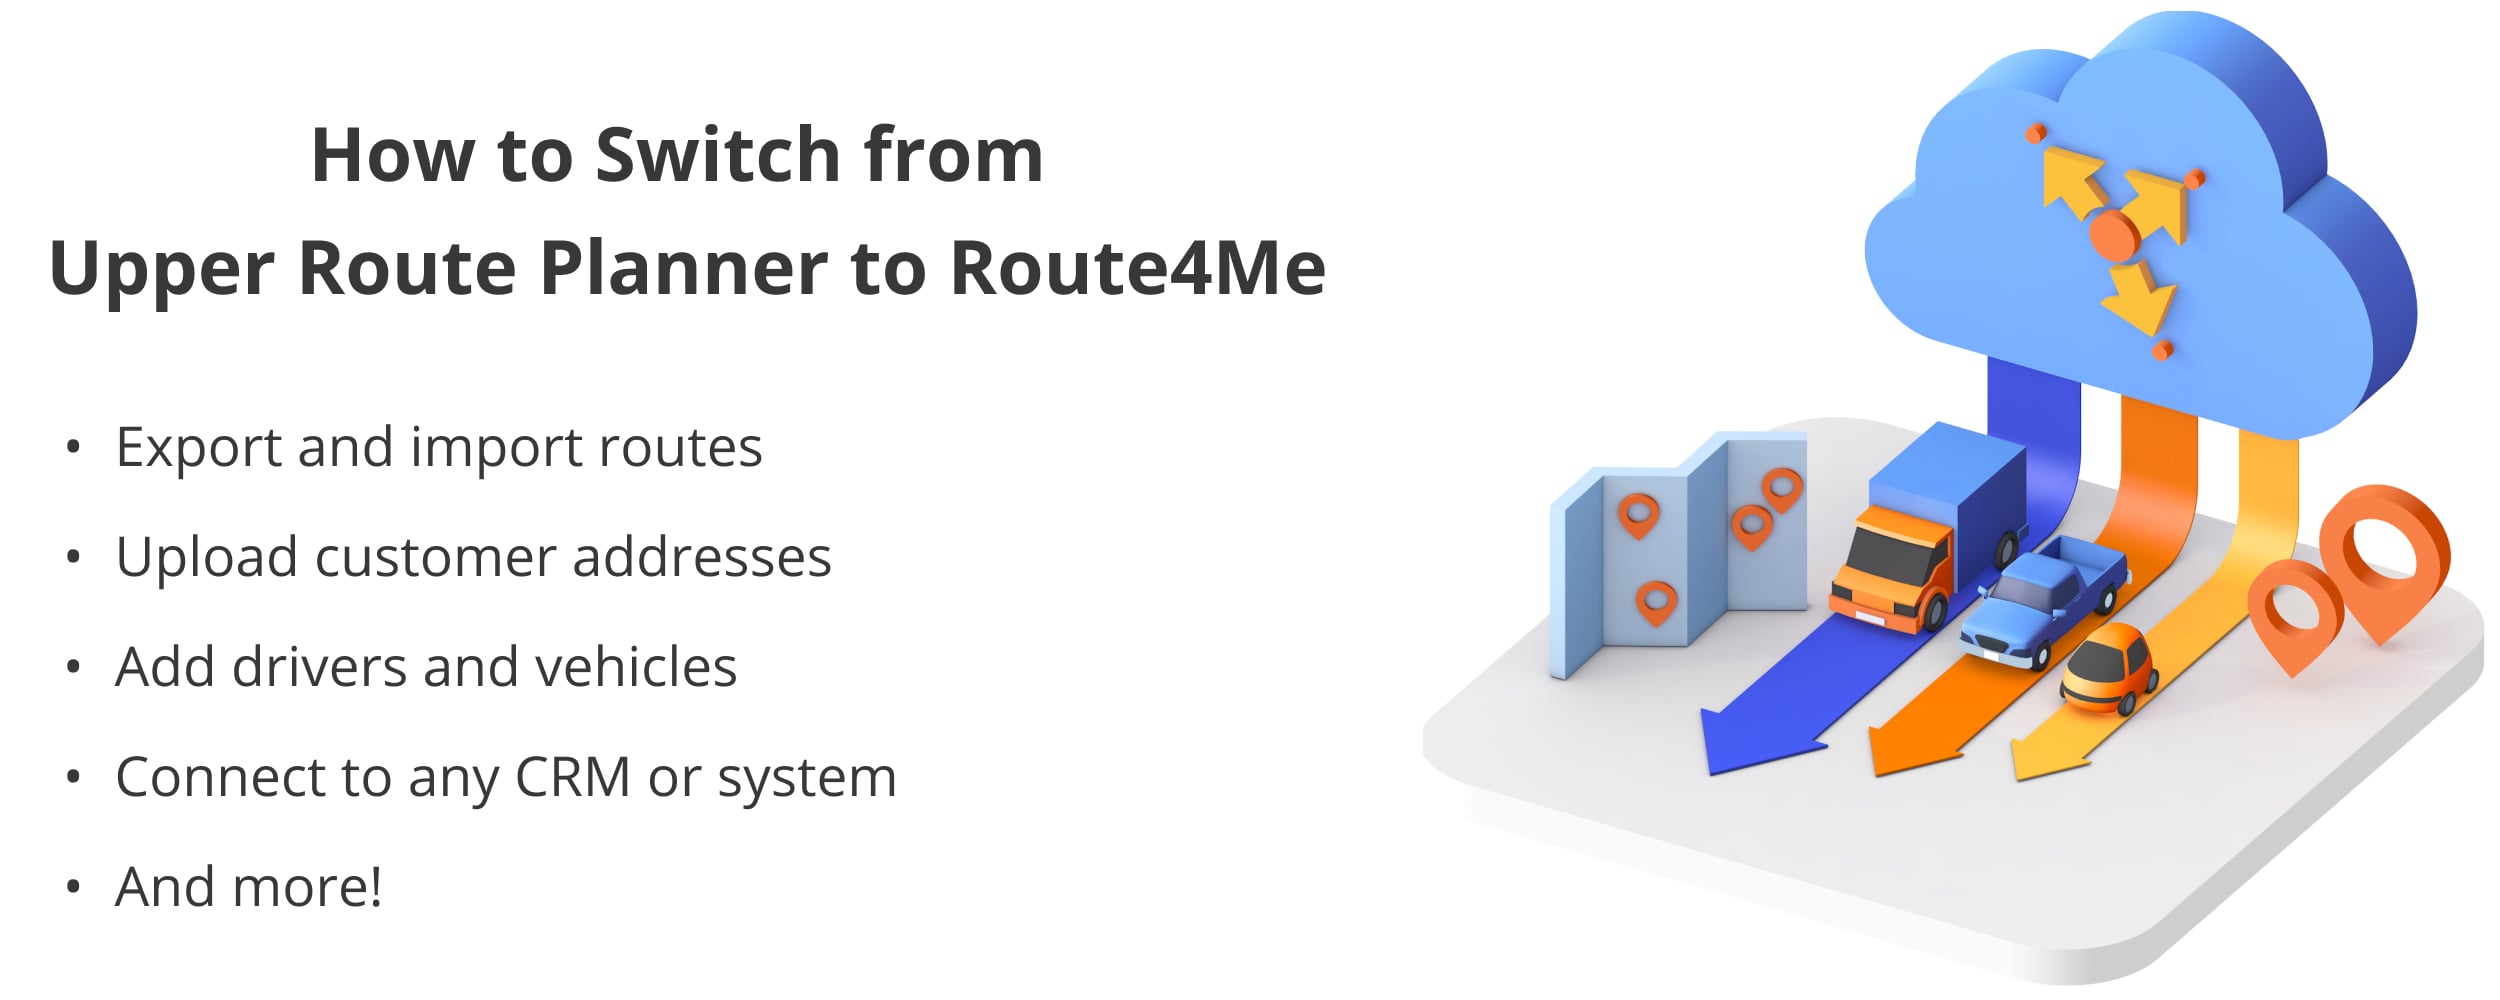 How to switch from Upper Route Planner to Route4Me, export routes, import addresses, and more.